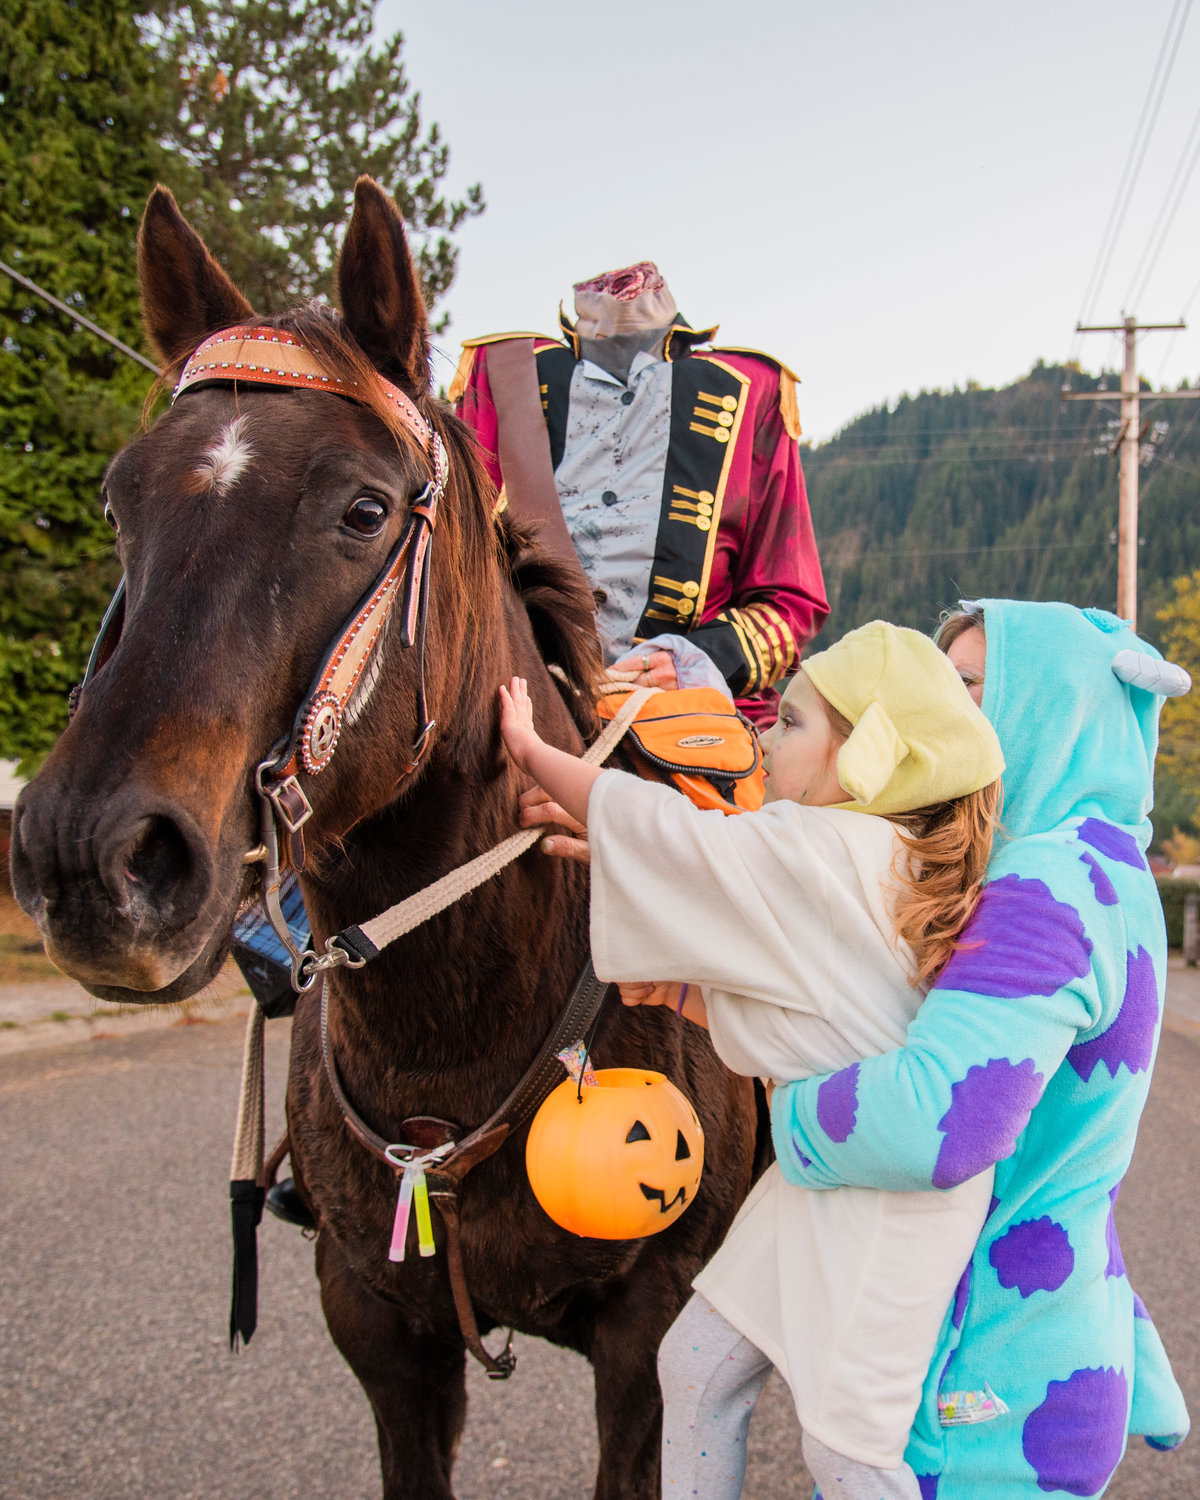 Girls sport costumes as they come up to pet Tallulah Jane after receiving candy from Bobbie Dalton, the Headless Horseman, in Morton on Halloween.